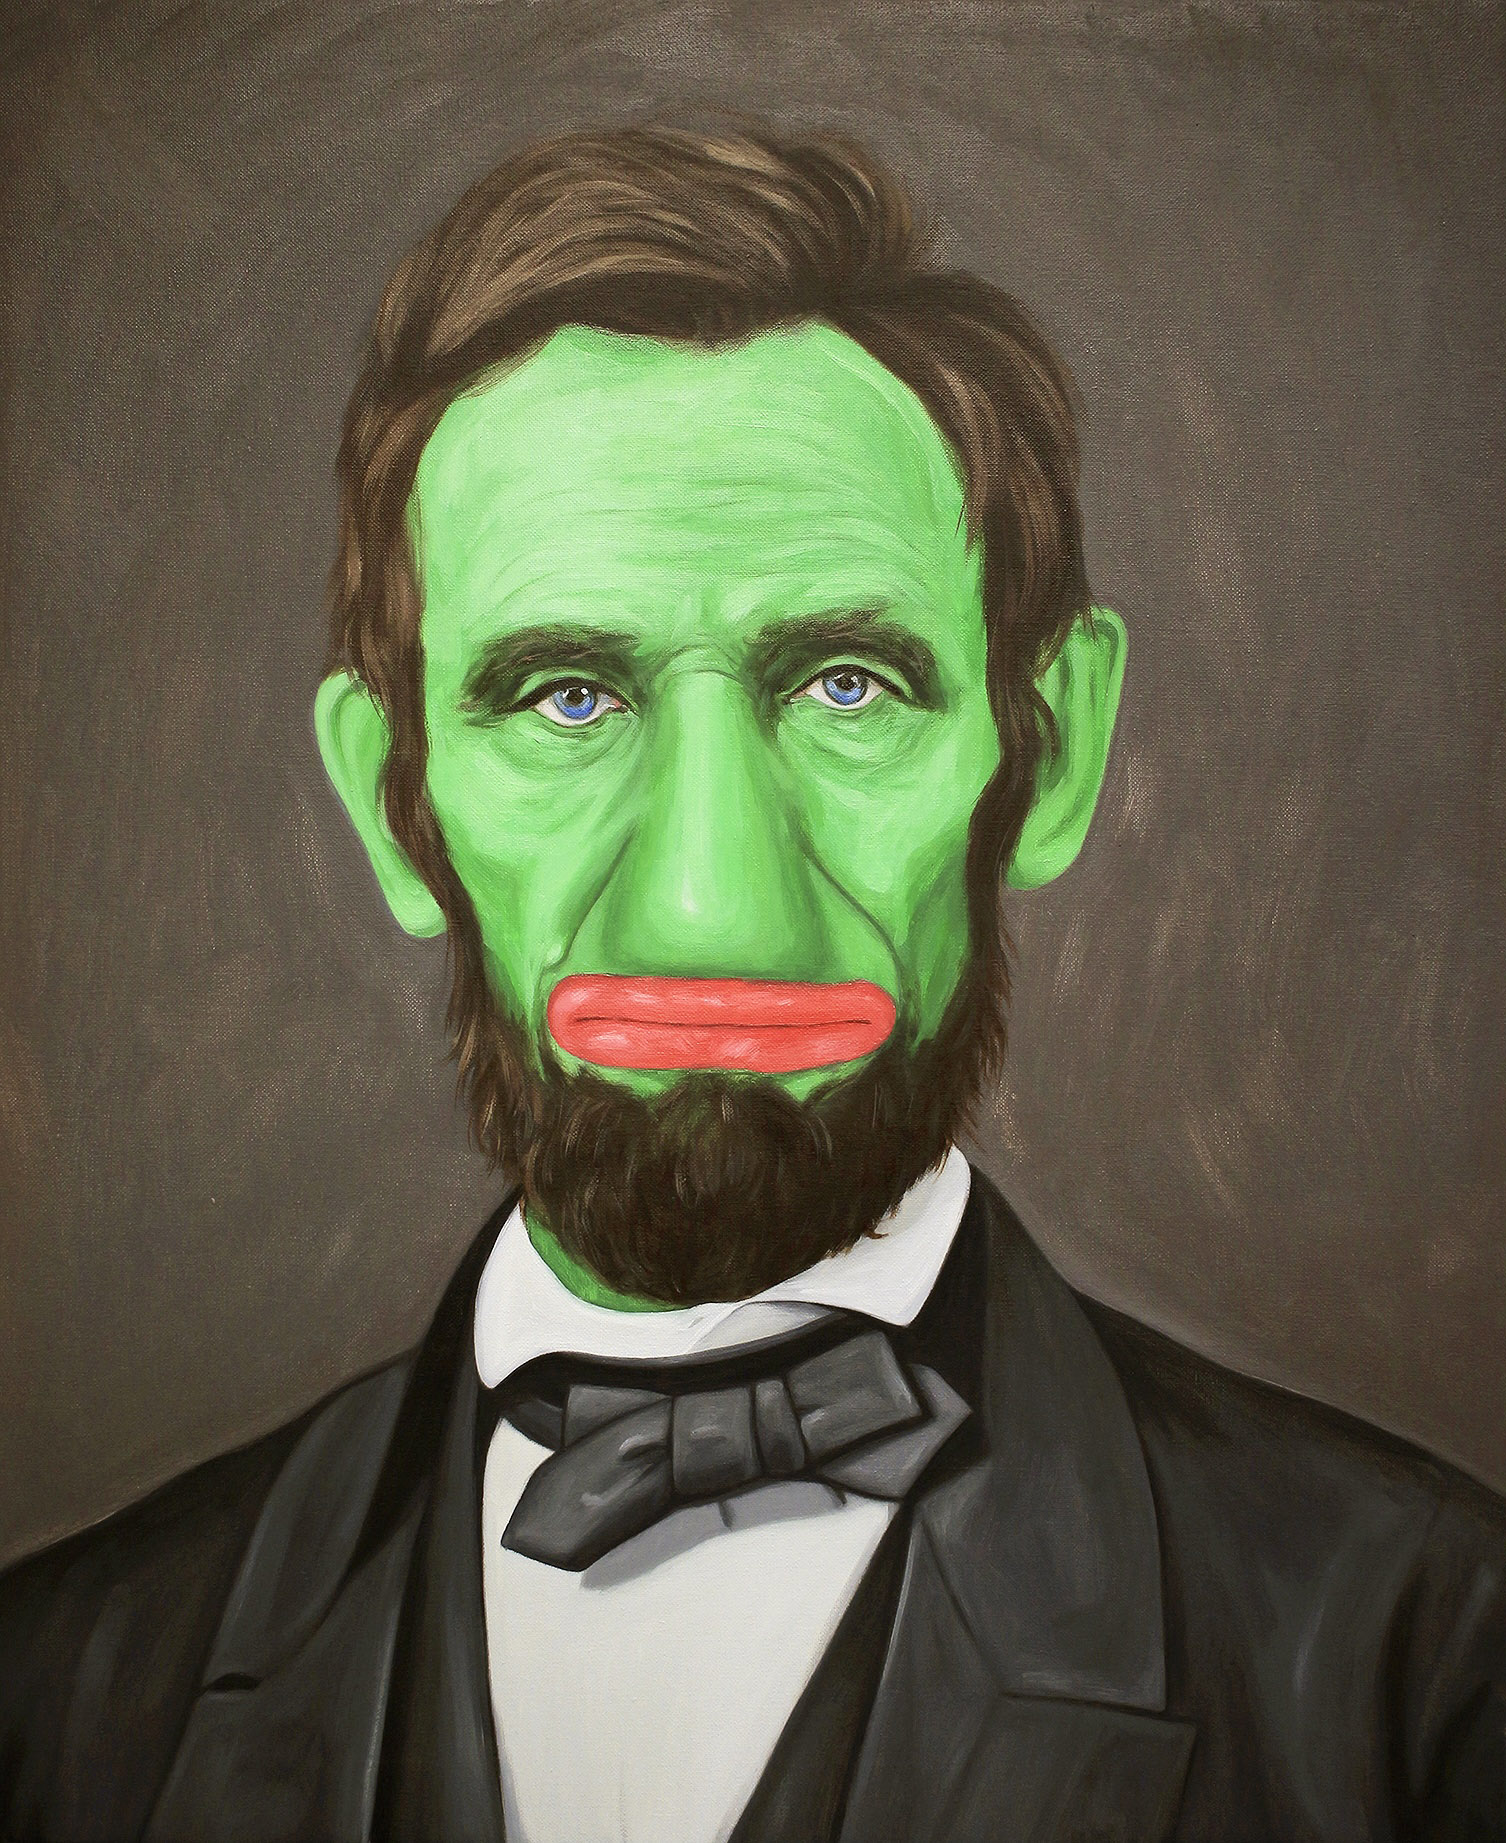 LINCOLNPEPE